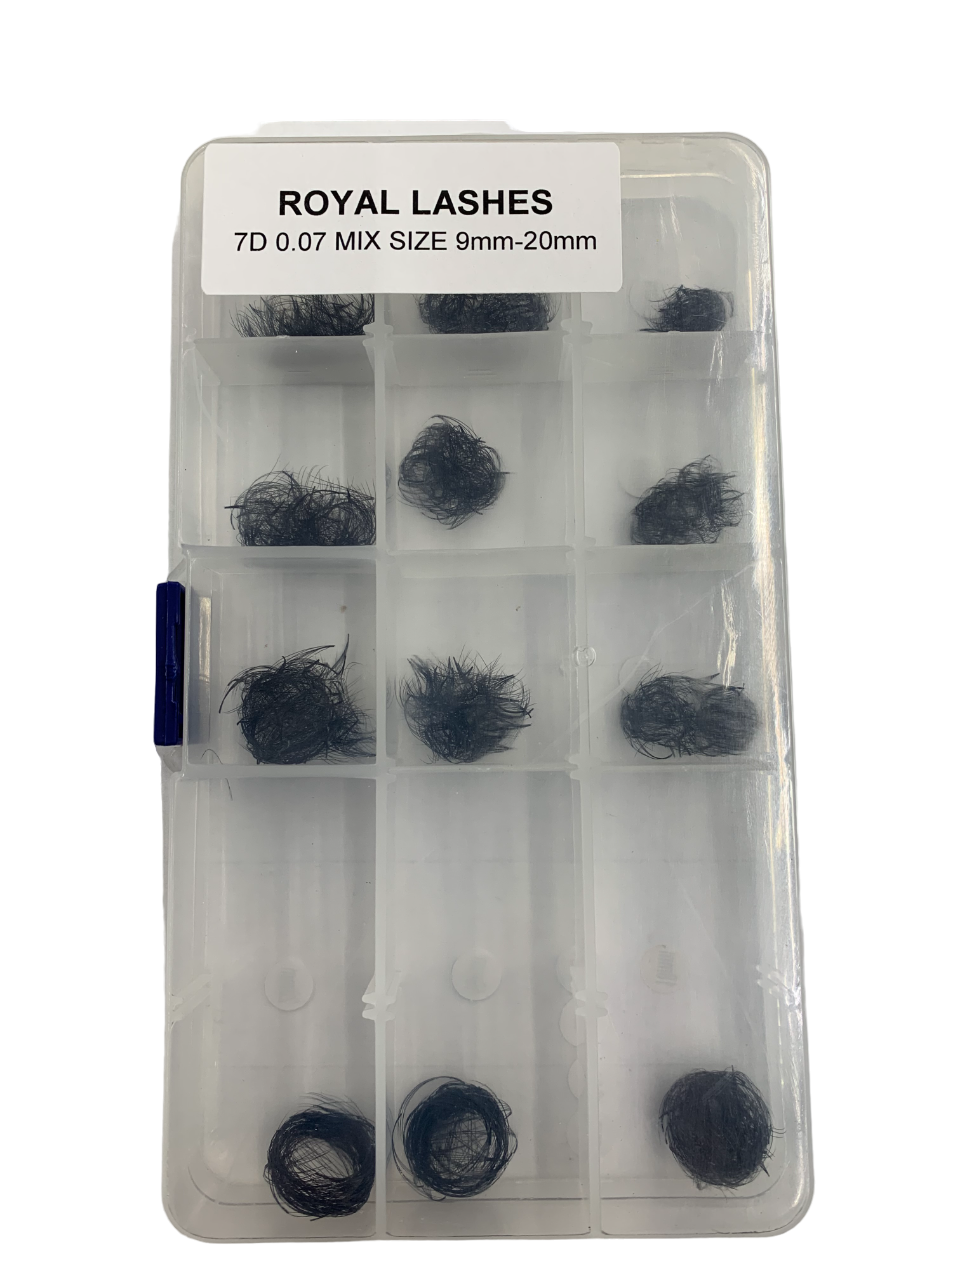 Royal Lashes 7D 0.07 Mix Size 9mm-20mm